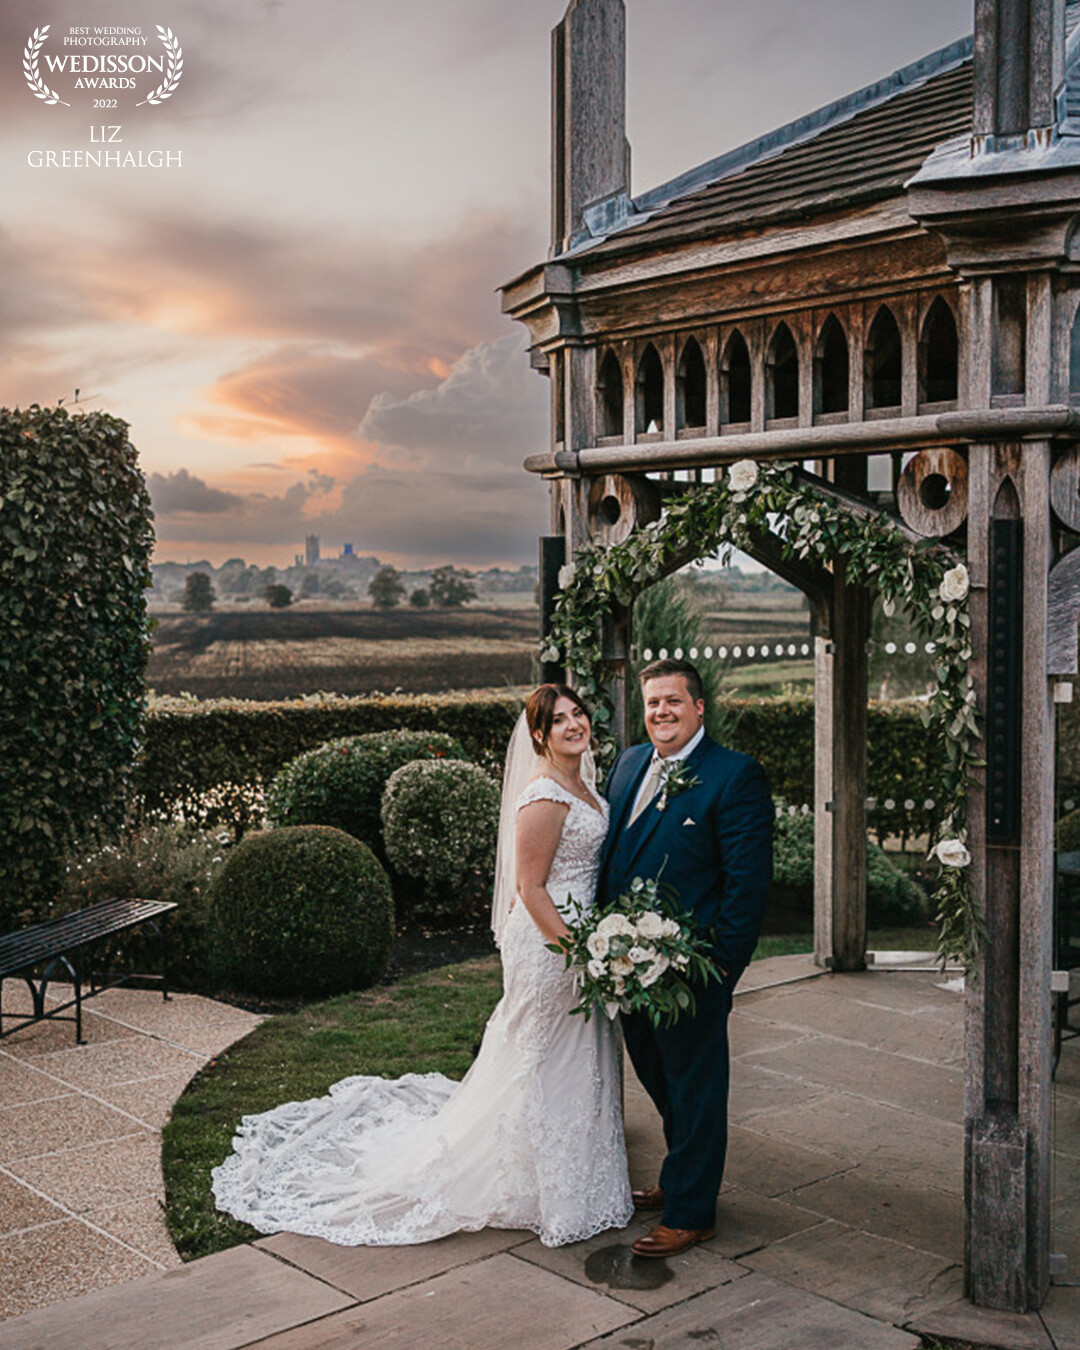 After not being able to get married outside at The Old Hall Ely because of the rain, this amazing sunset appeared over the views of Ely Cathedral.  We knew this would be a beautiful image and it is one of the couples favourites